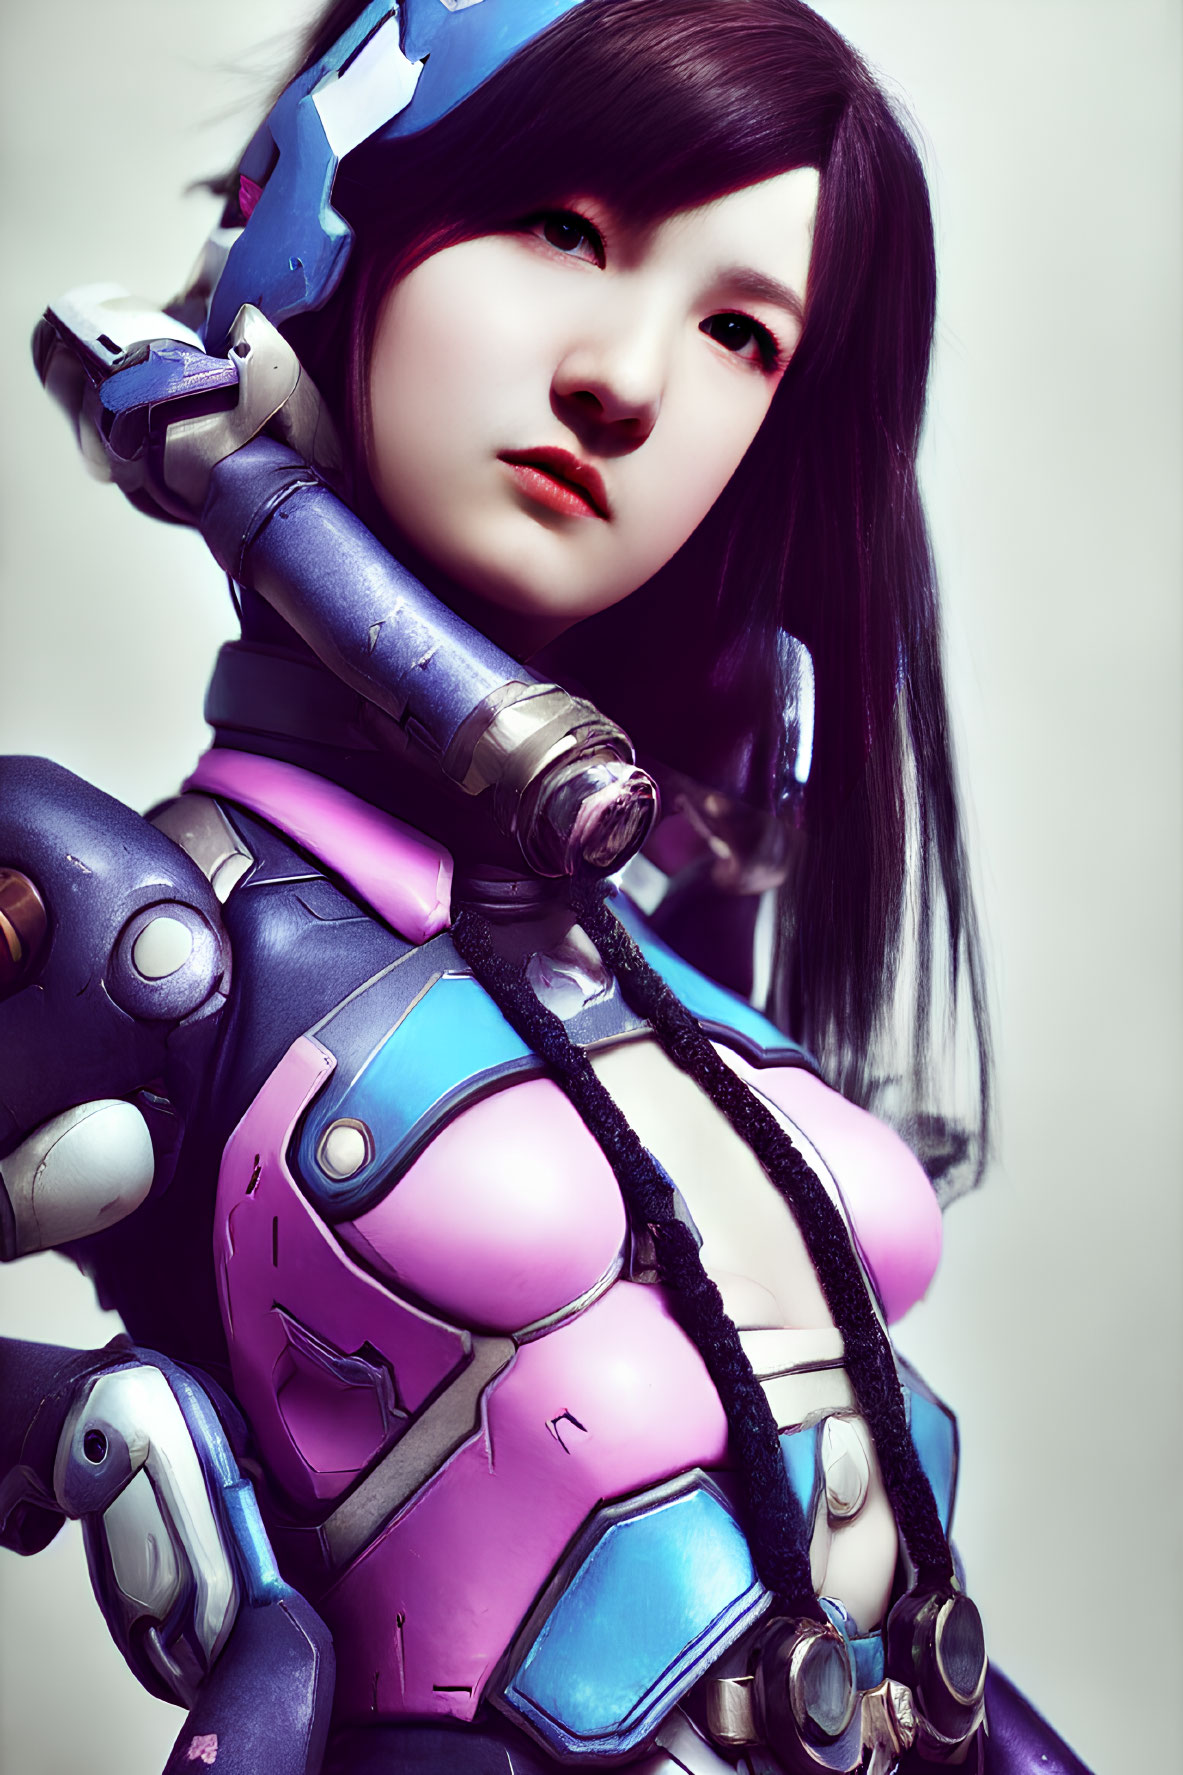 Intricate Blue and Pink Robotic Costume with Detailed Armor Panels